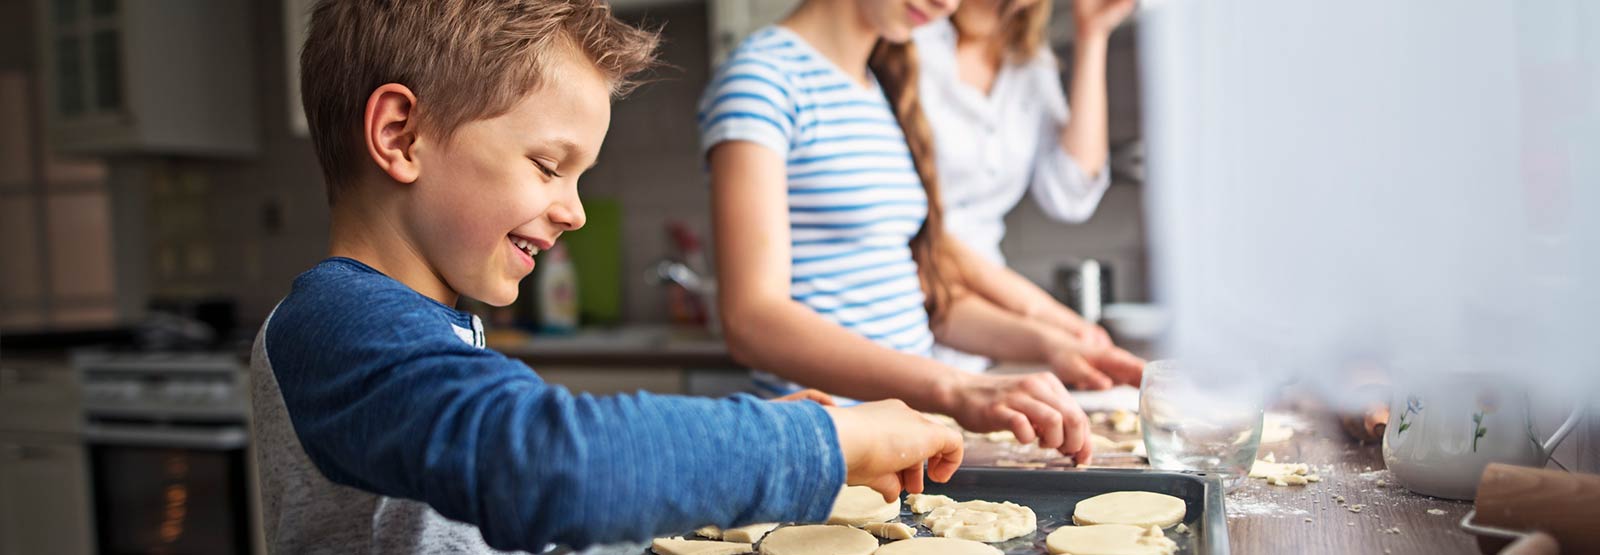 Boy making cookies with family at home.